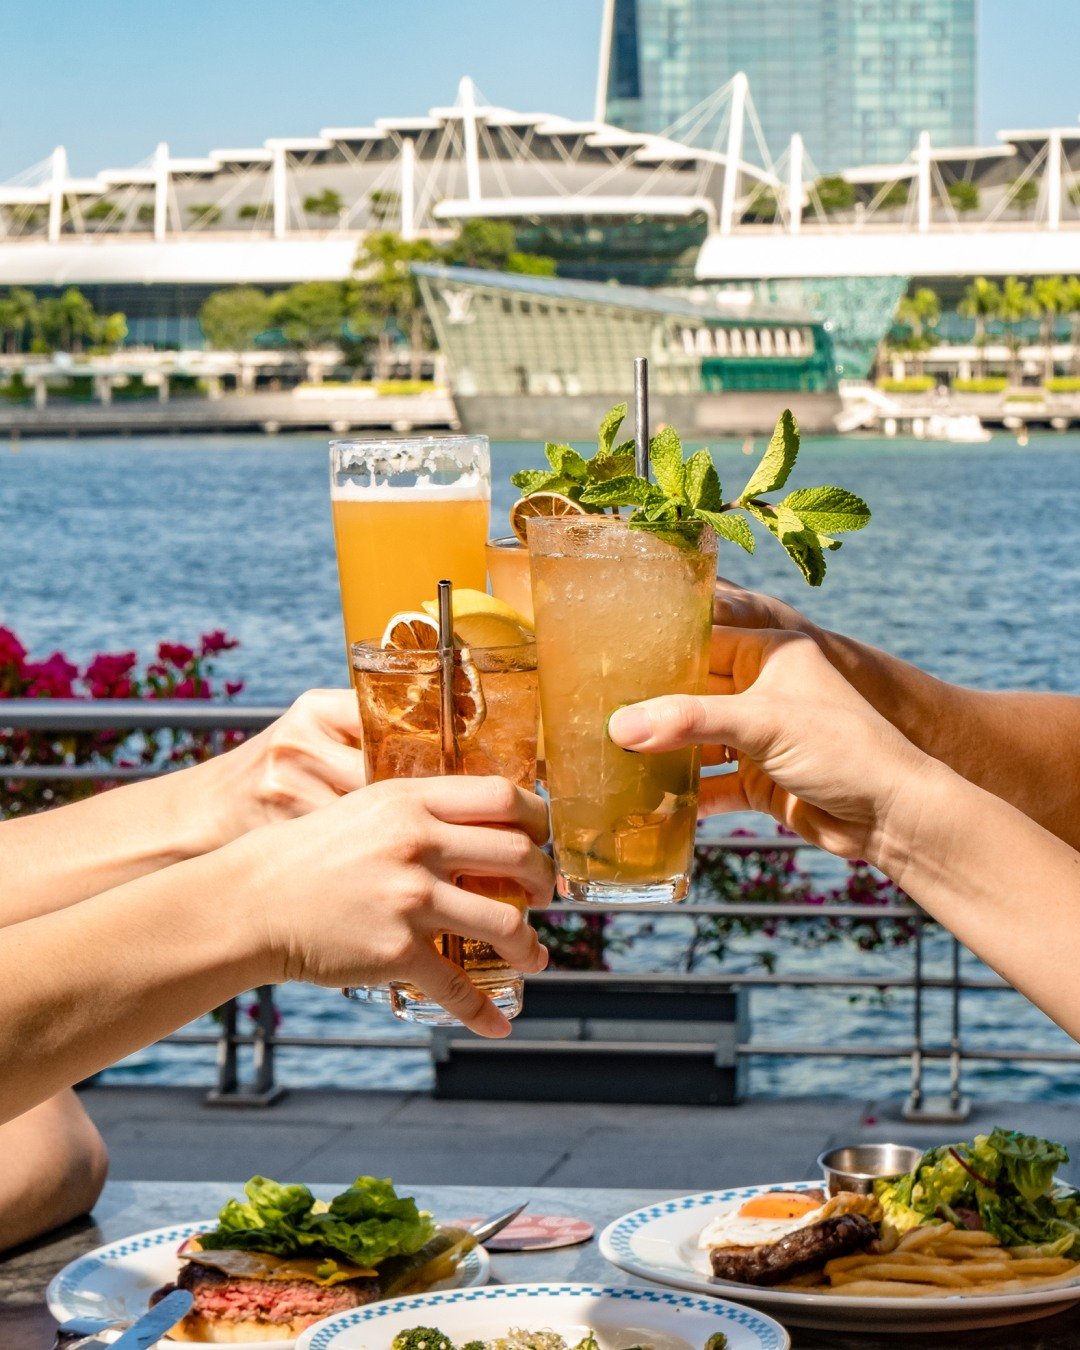 Our love story: &ldquo;Friday drinks&rdquo;. With a view like this, baby, just say yes!